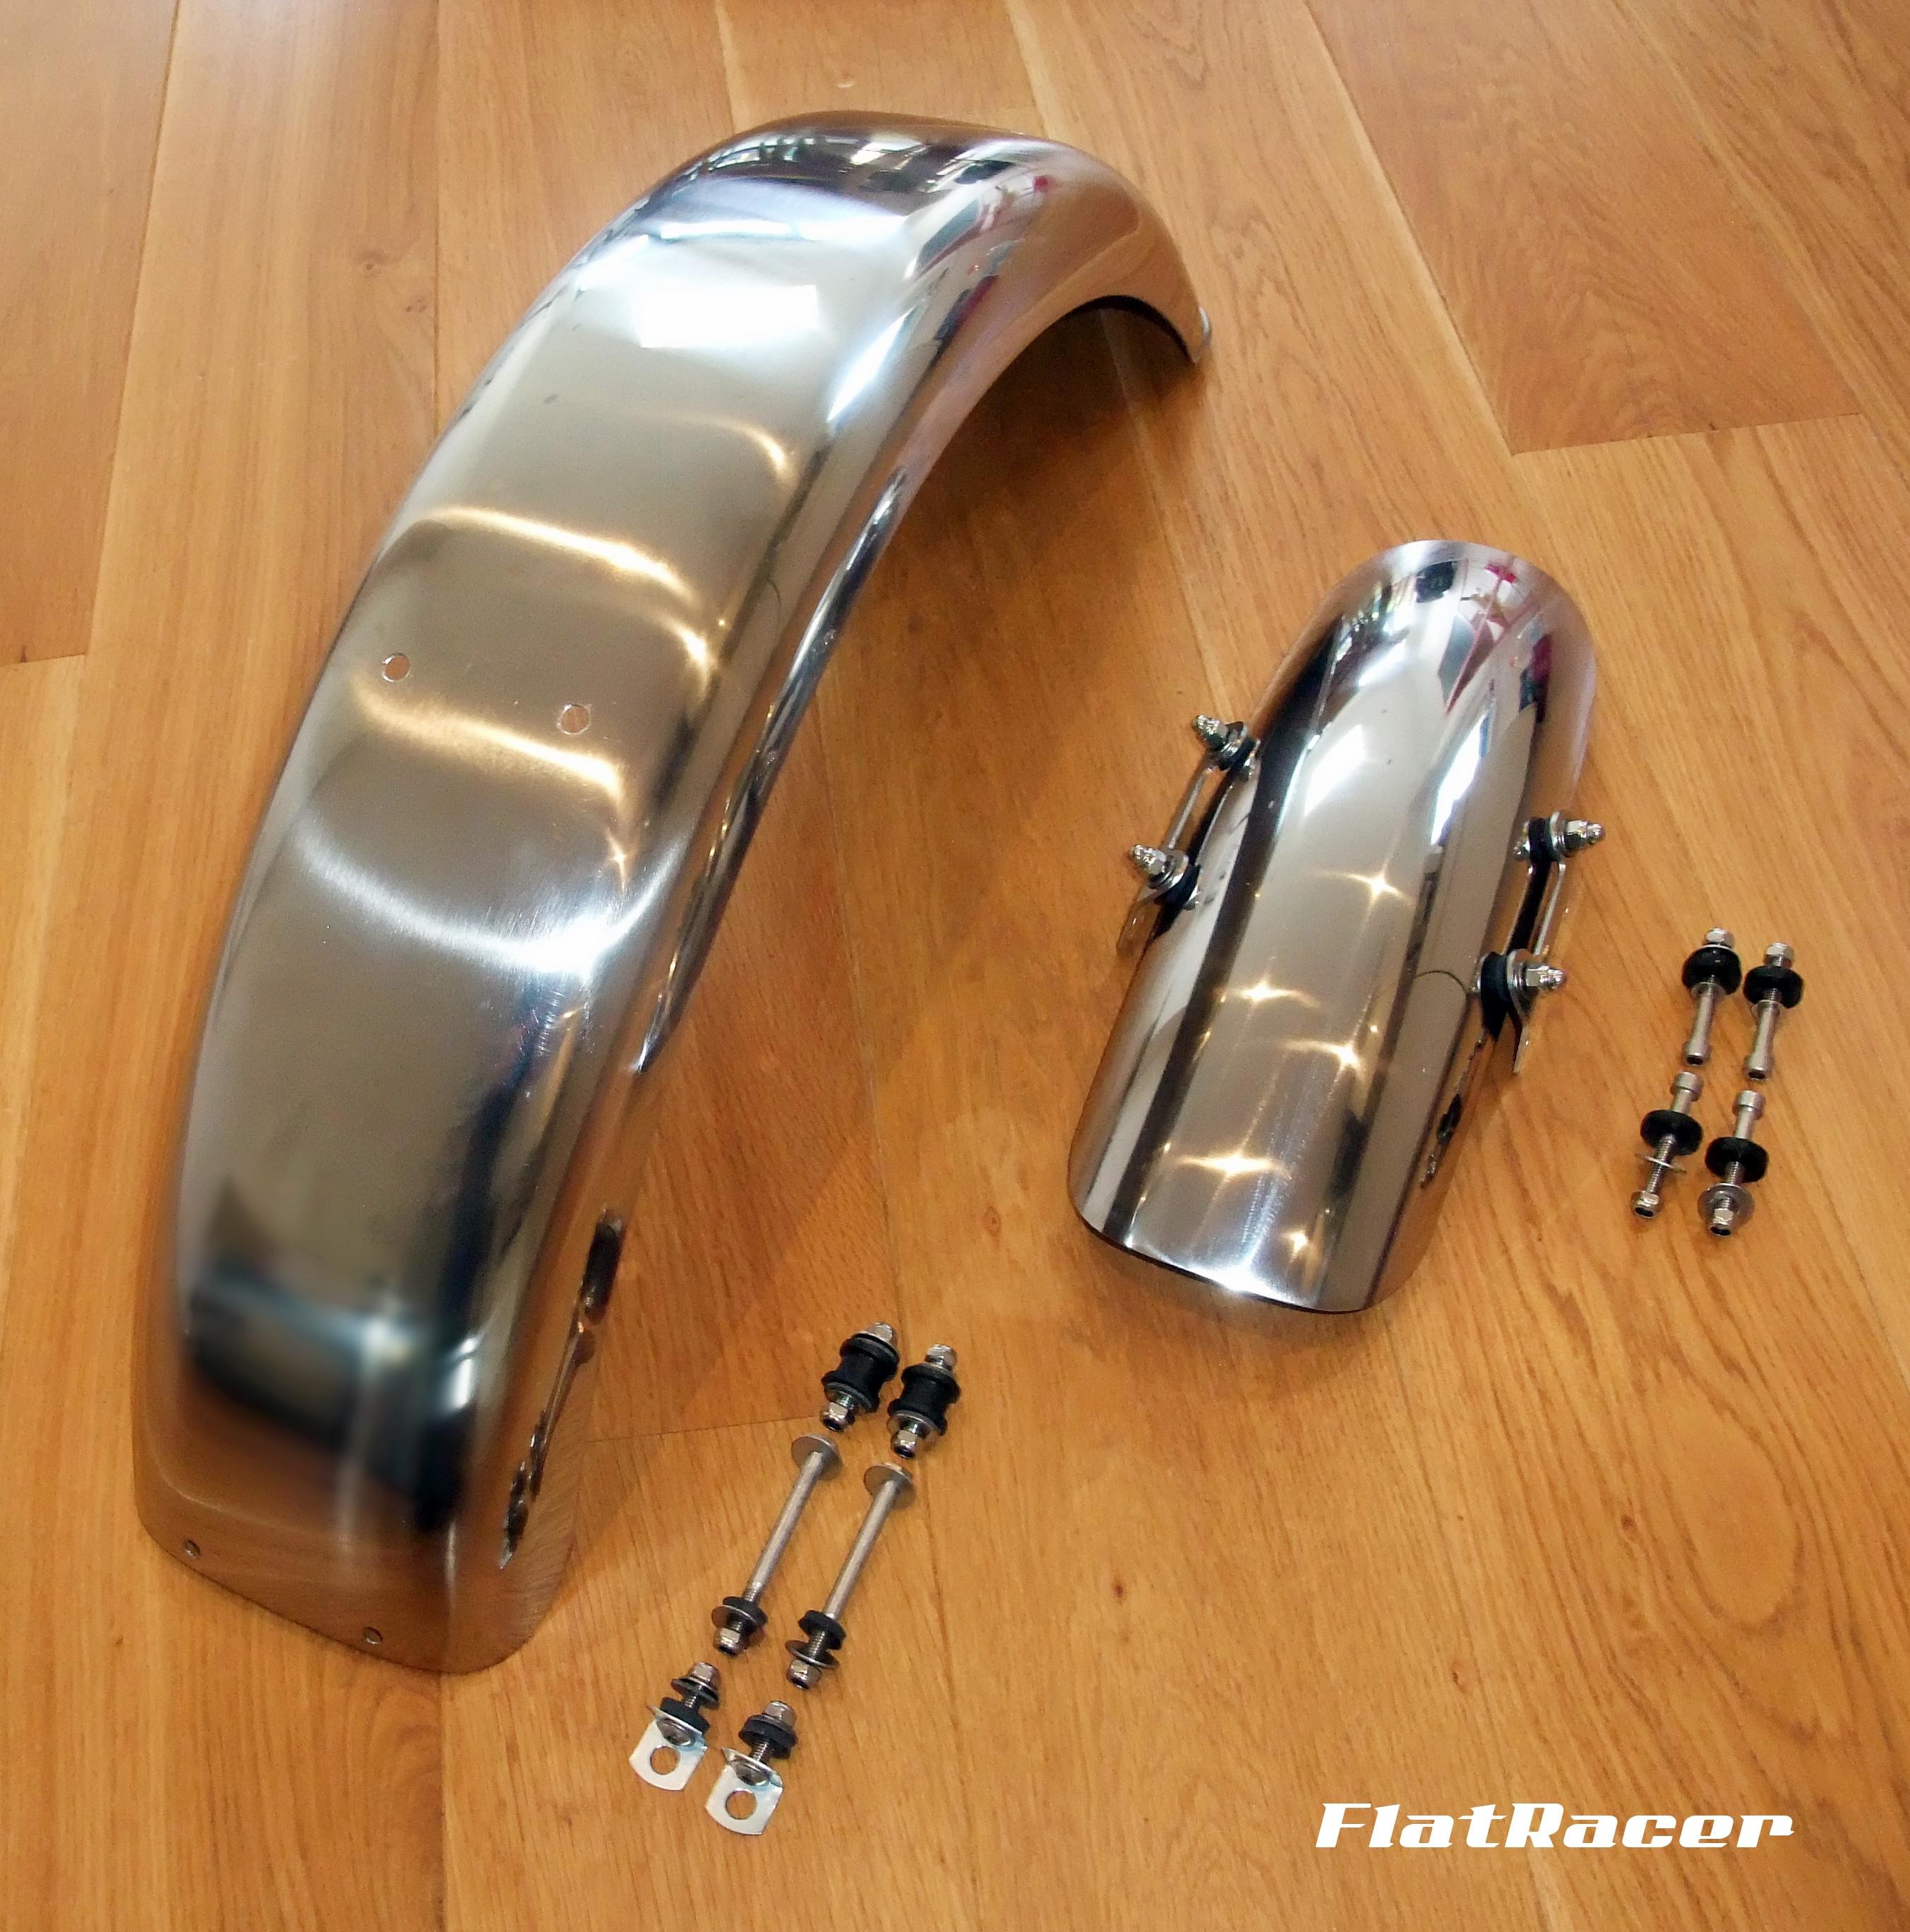 FlatRacer BMW Monolever (85-96) stainless steel mudguard combo